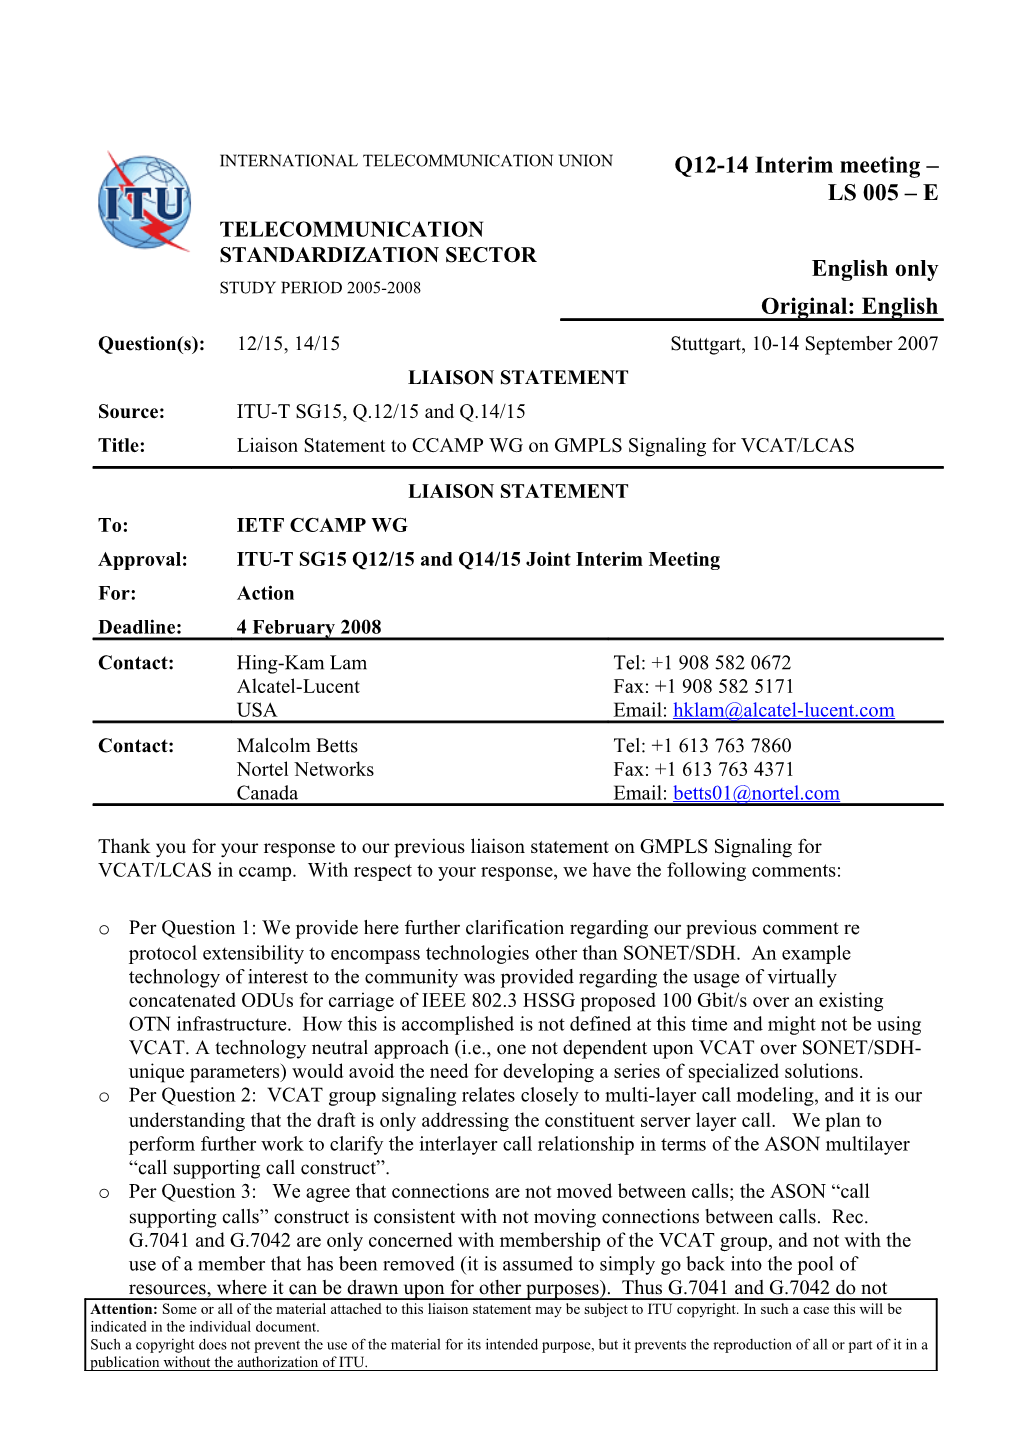 Liaison Statement to CCAMP WG on GMPLS Signaling for VCAT/LCAS